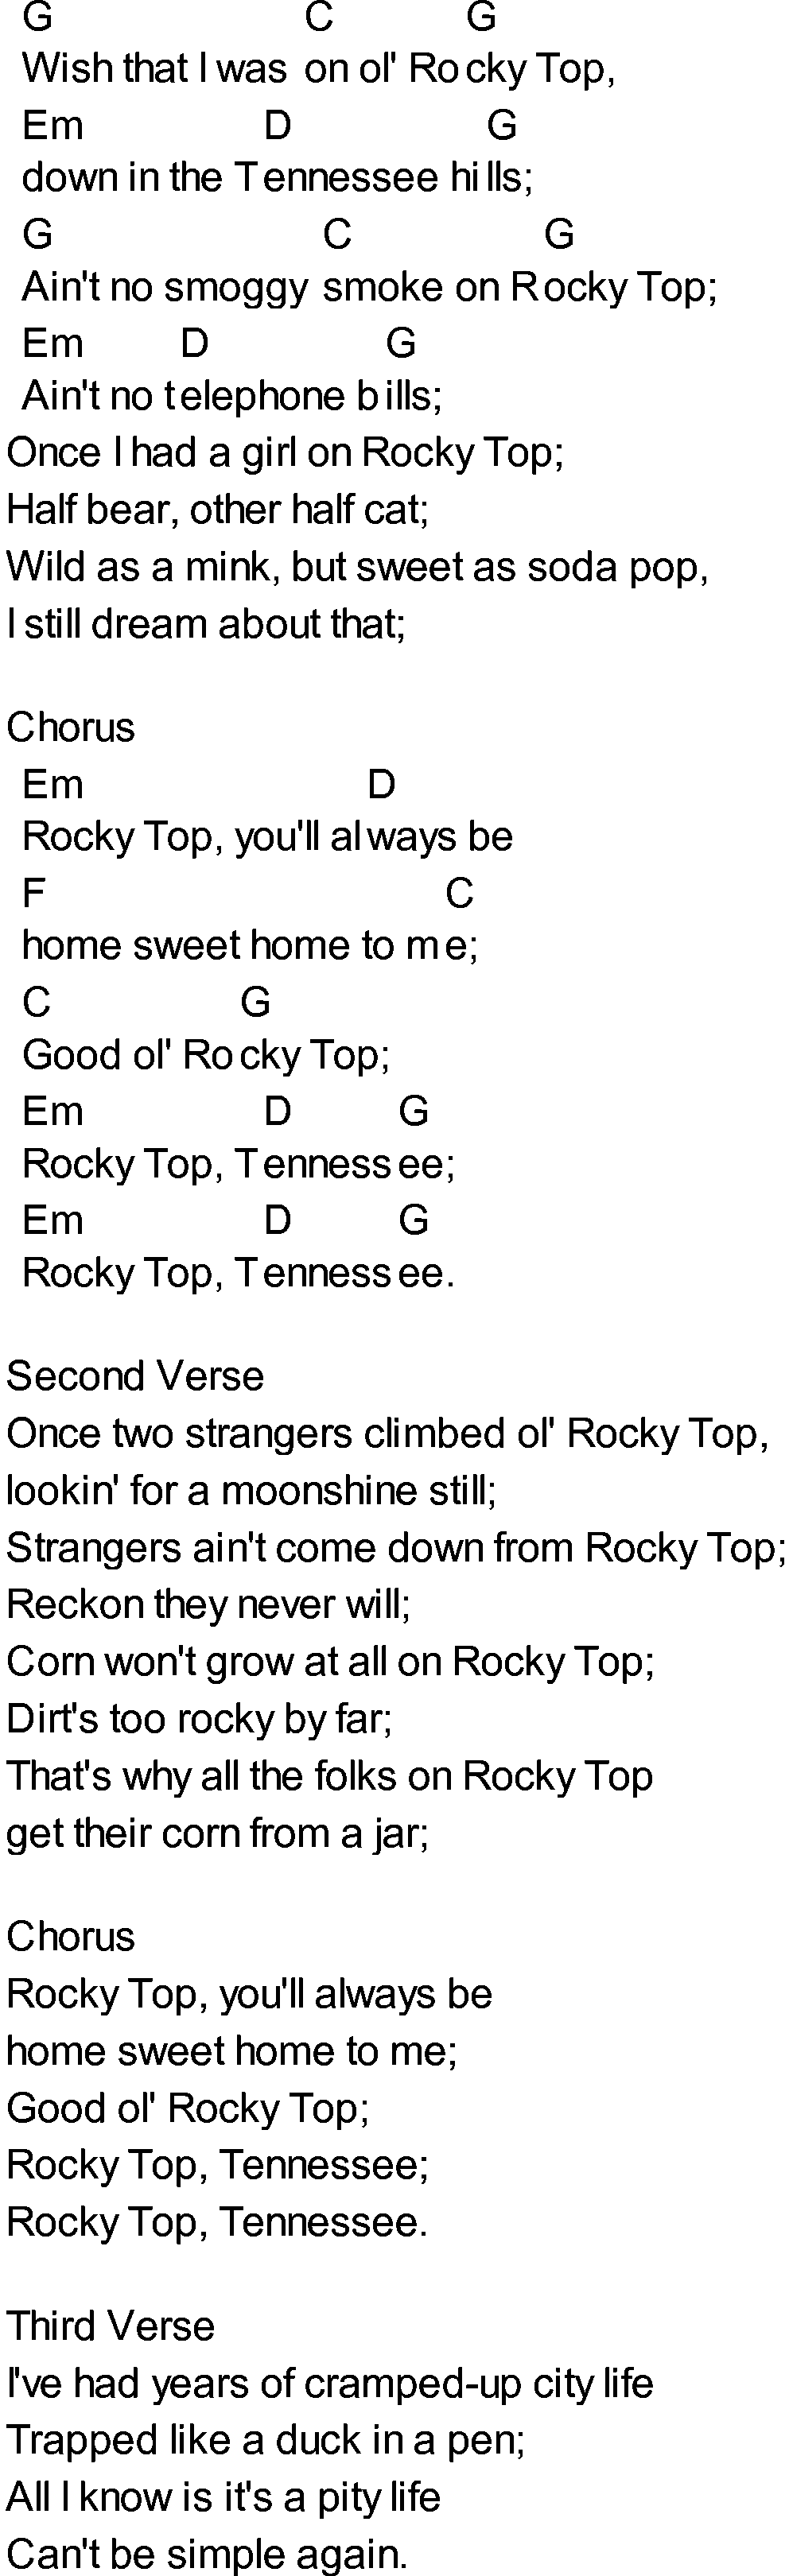 Bluegrass songs with chords - Rocky Top Tennessee